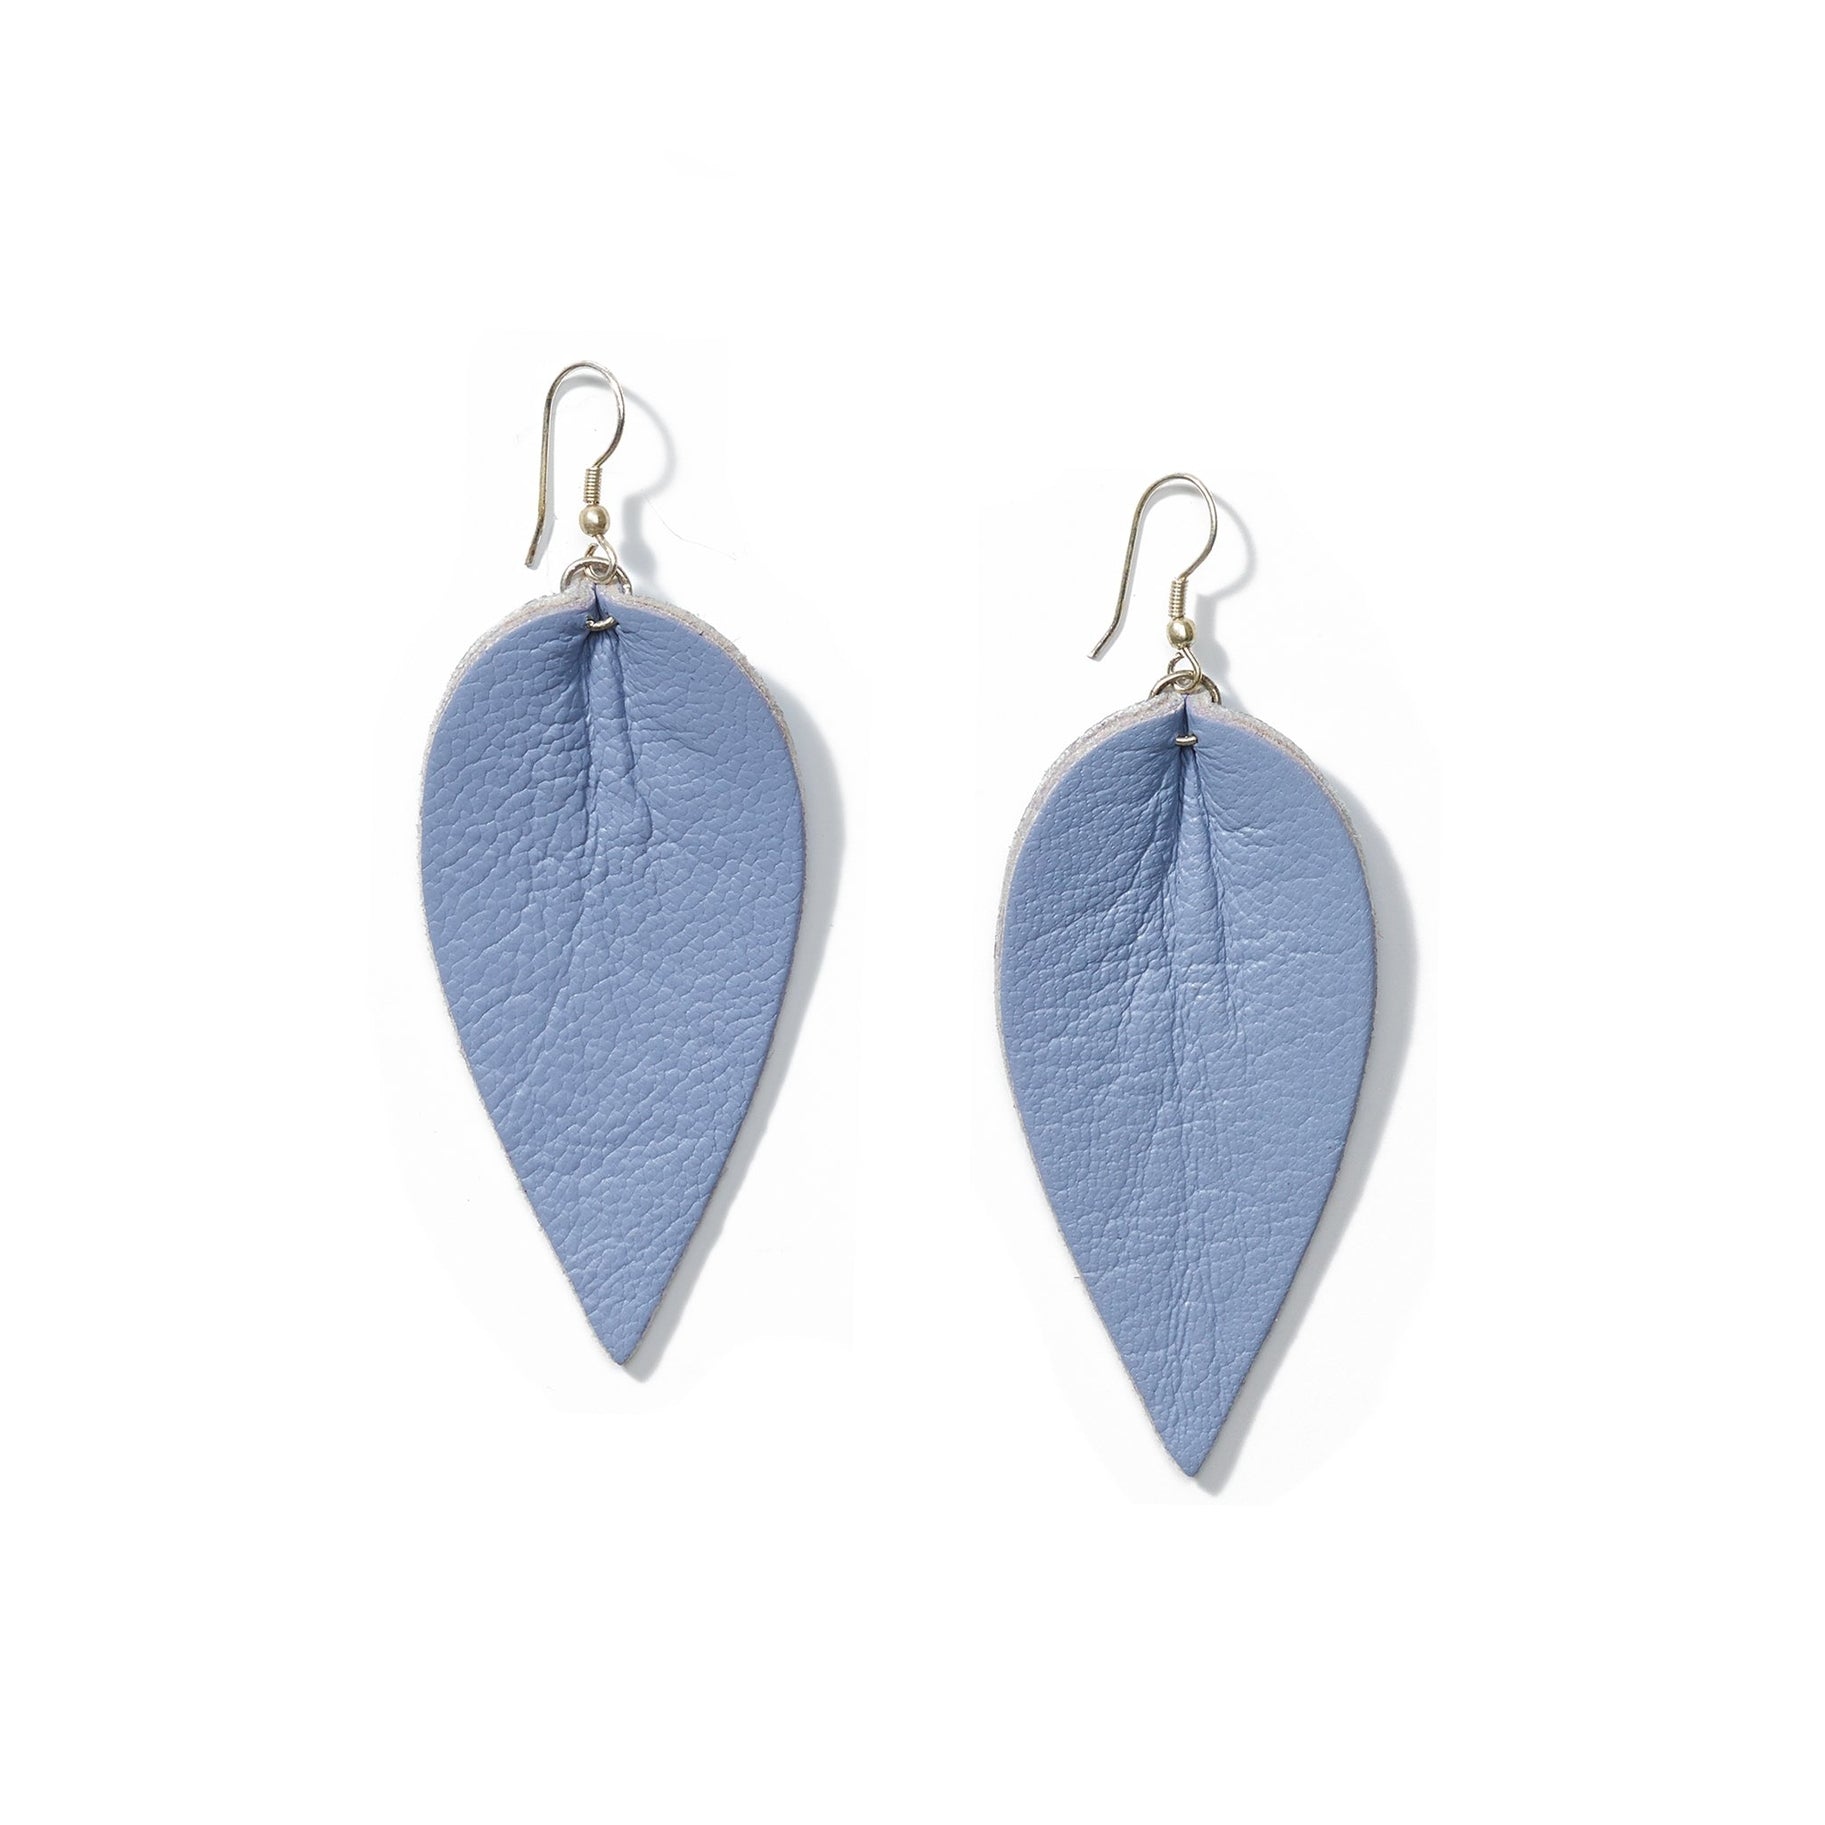 Pair of blue leather earrings in the shape of an upside-down teardrop in front of a solid white backdrop